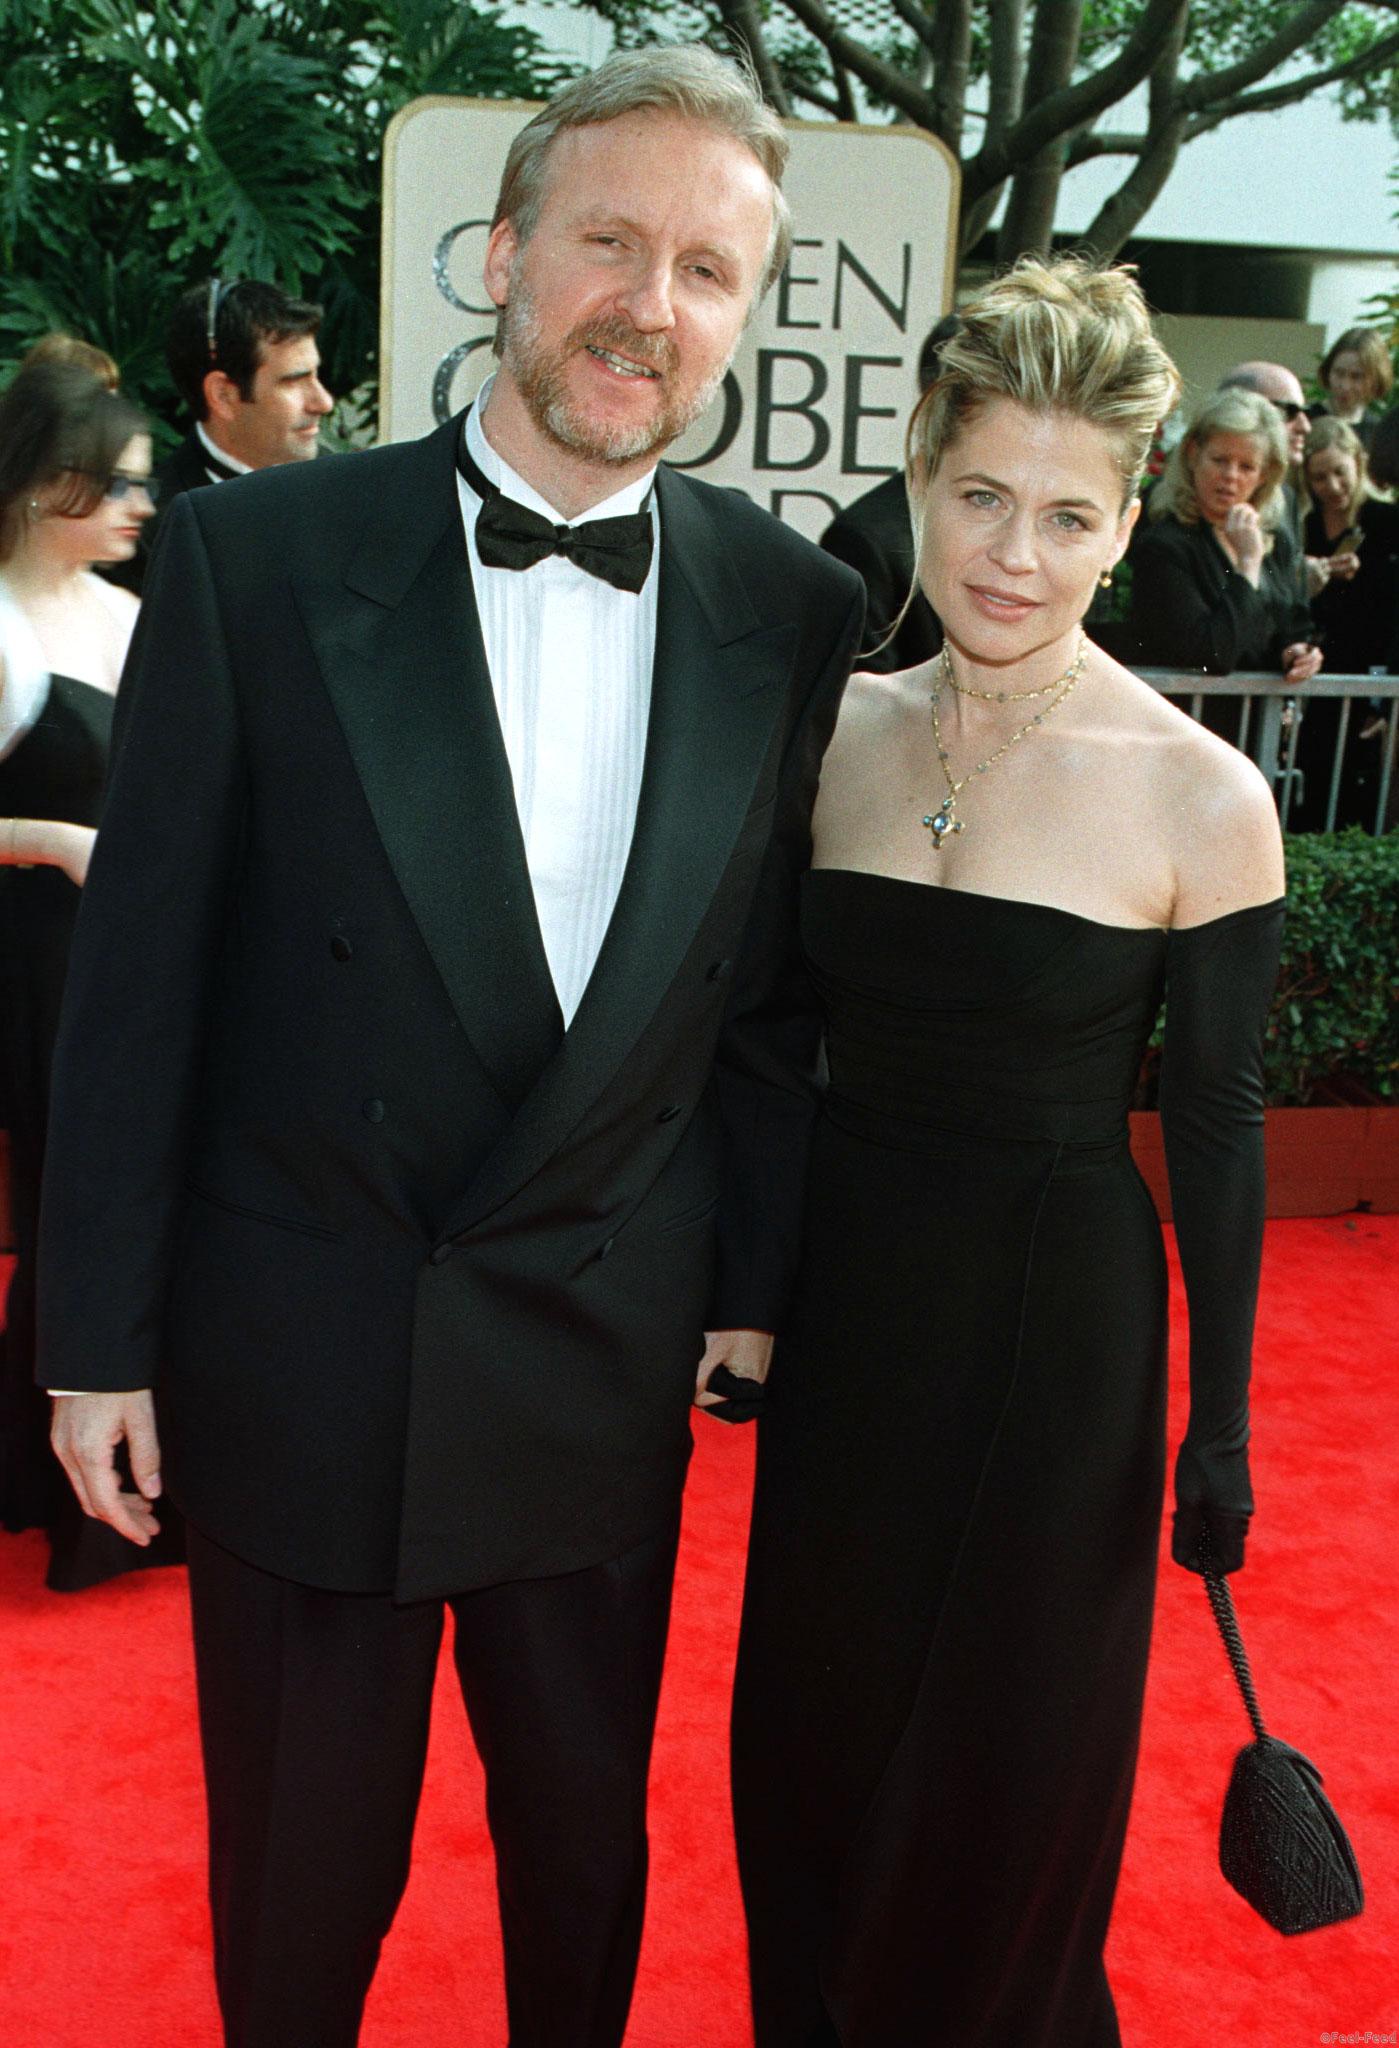 James Cameron and his wife Linda Hamilton arrive for the 55th annual Golden Globe Awards in Beverly Hills, January 18. The awards, sponsored by the Hollywood Foreign Press Association, honors excellence in film and television. Cameron's film "Titanic" is nominated for numerous awards. Hamilton was his star in the "Terminator" series. - RTXIMB8